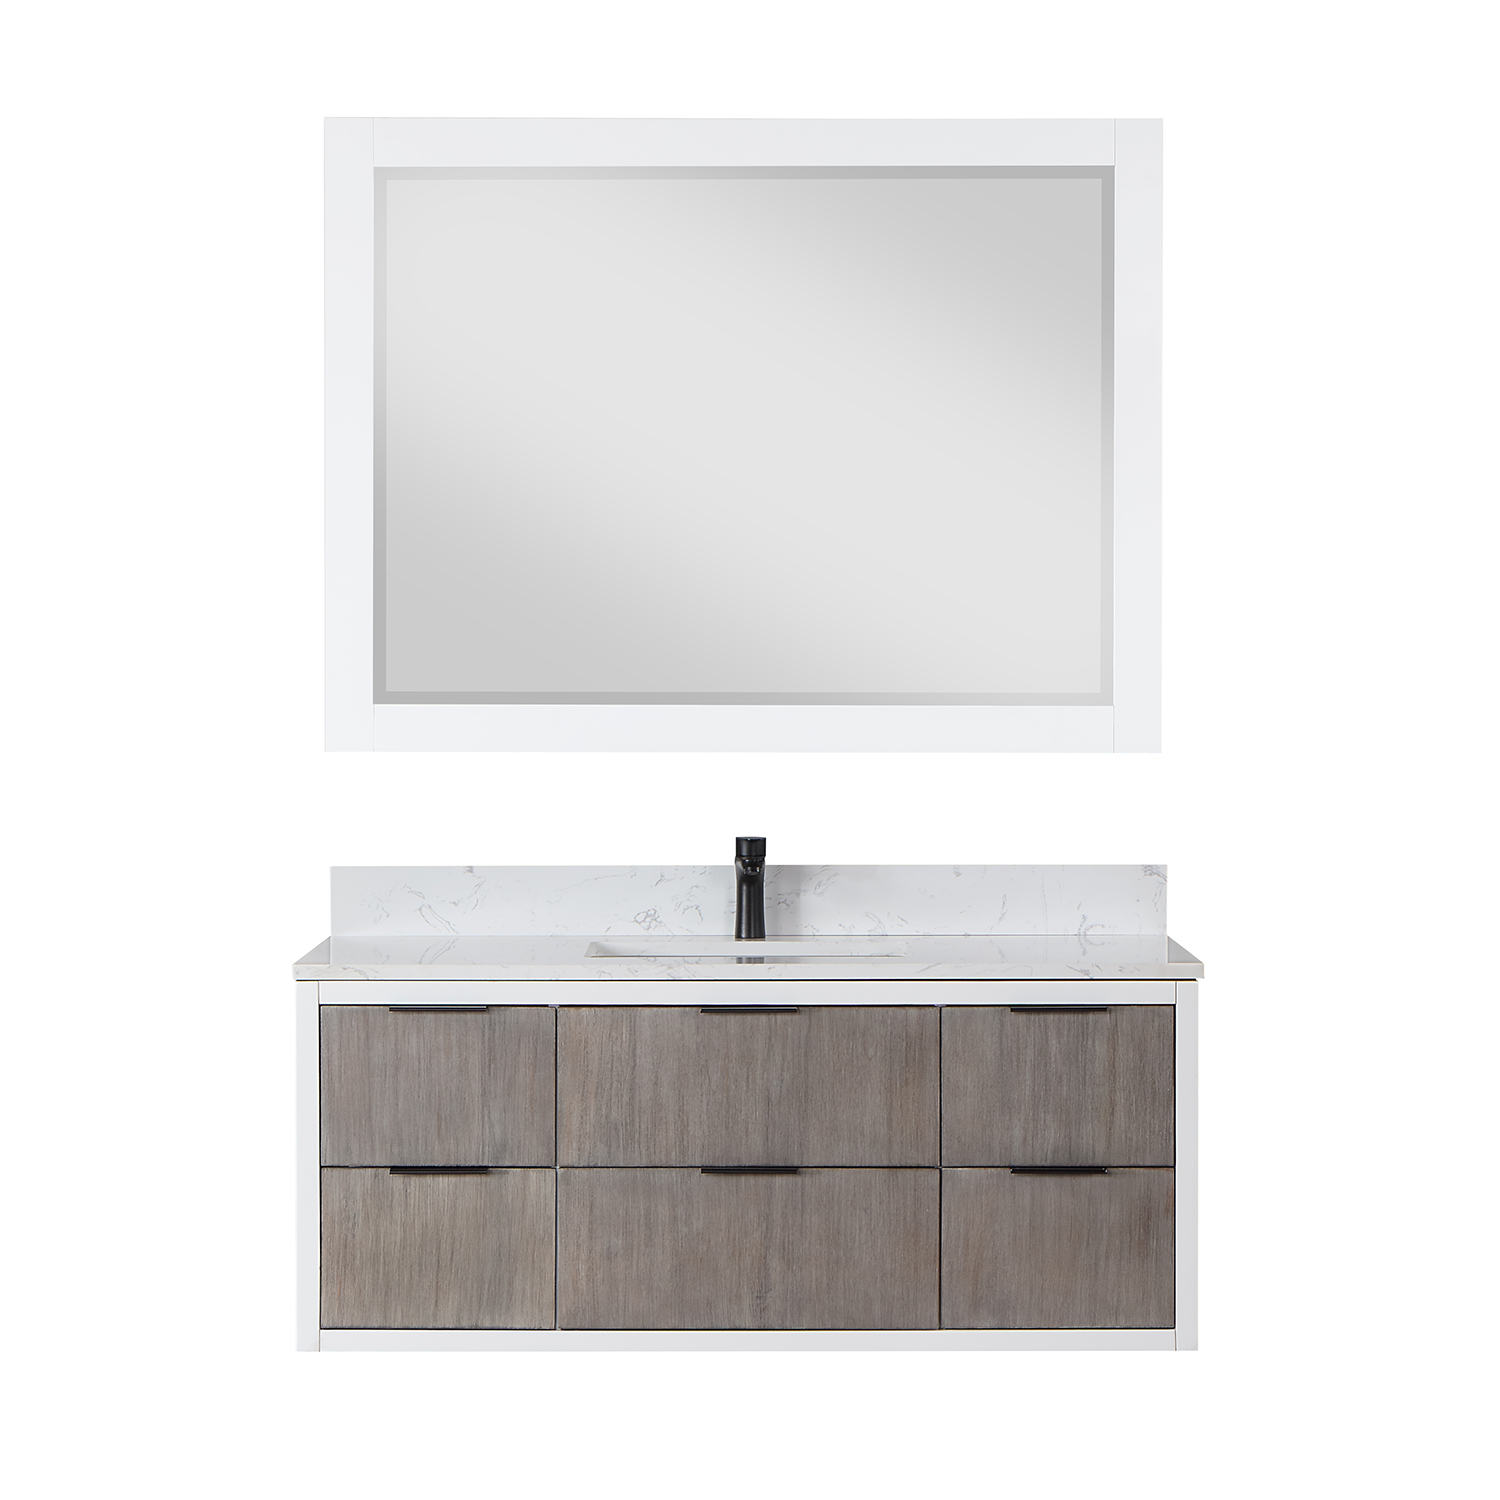 Issac Edwards Collection 48" Single Bathroom Vanity in Classical Gray with Carrara White Composite Stone Countertop without Mirror 